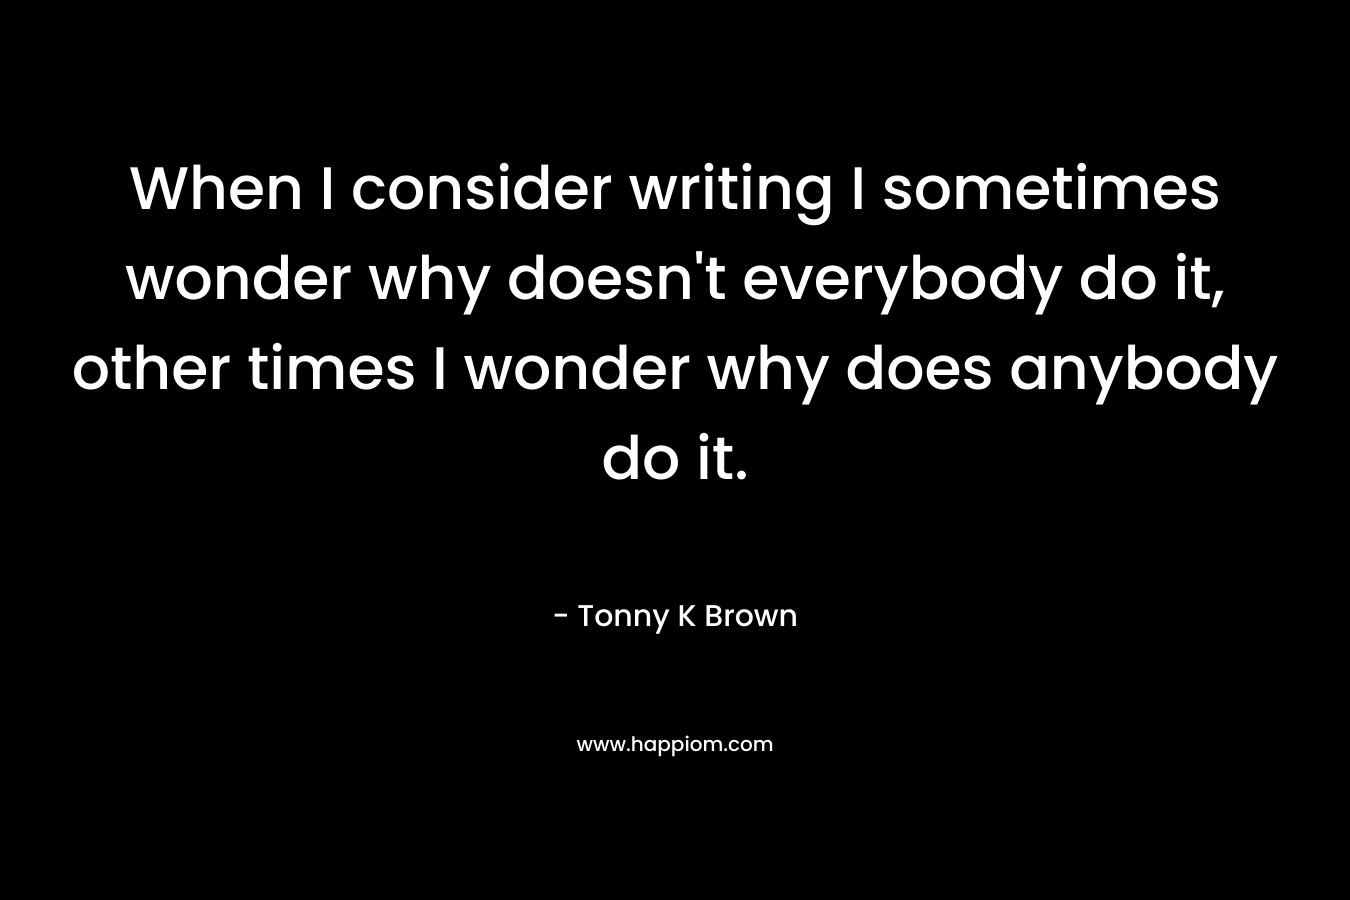 When I consider writing I sometimes wonder why doesn’t everybody do it, other times I wonder why does anybody do it. – Tonny K Brown